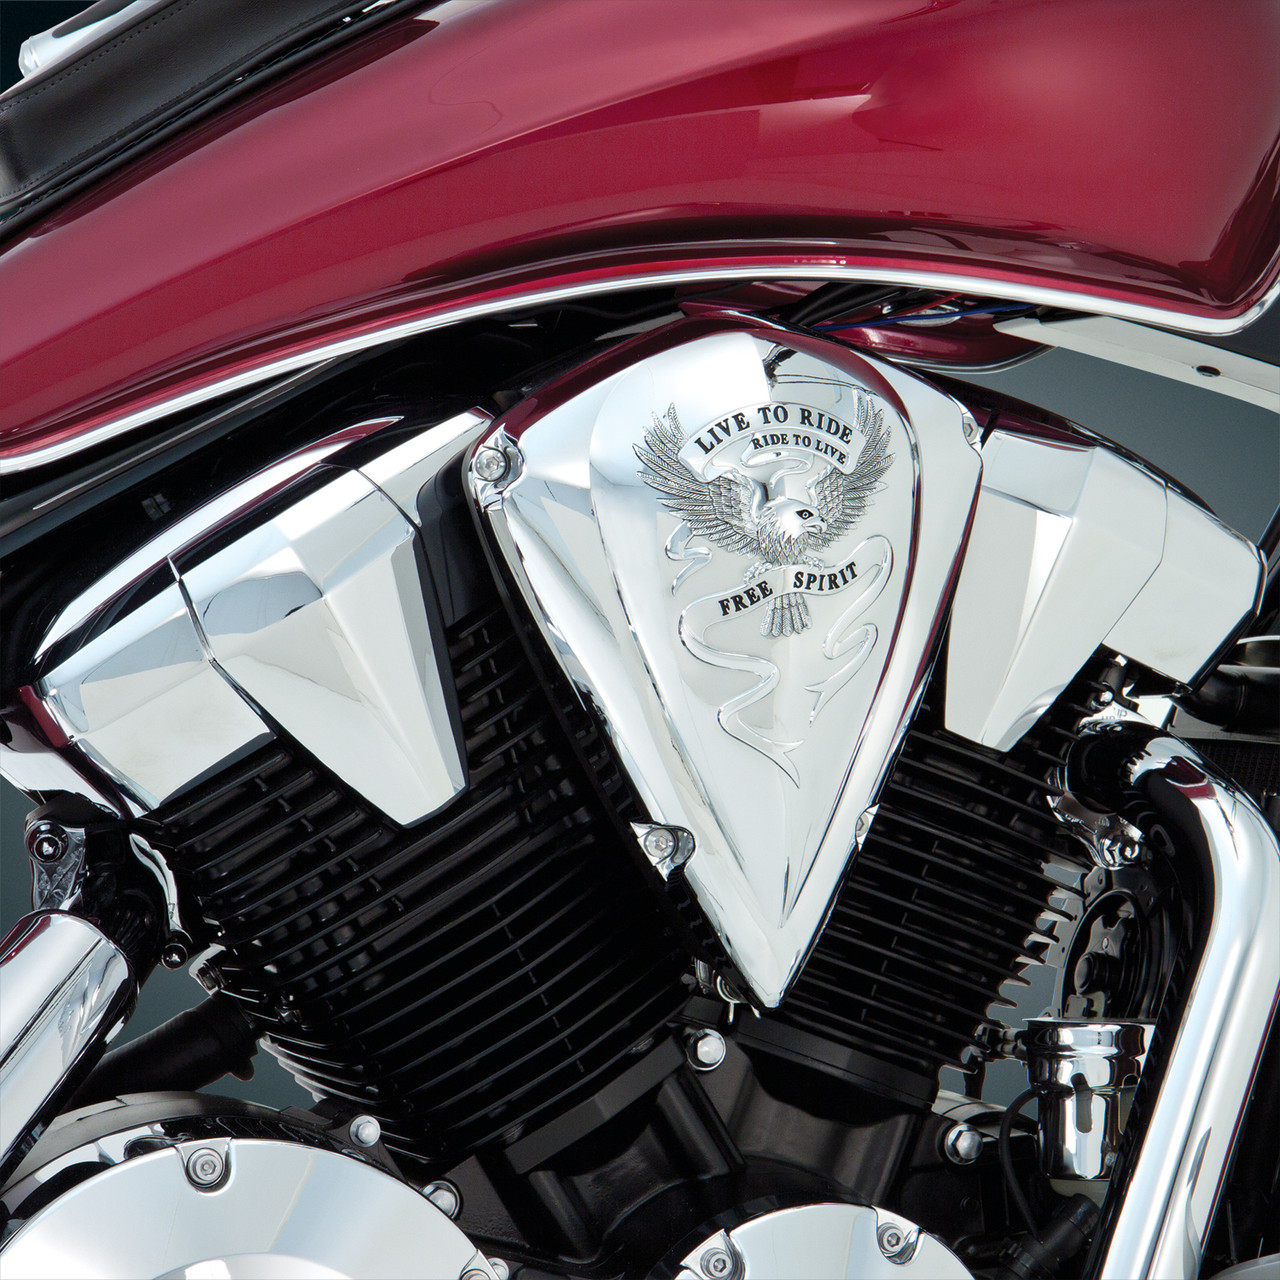 Show Chrome Accessories New Air Cleaner F.S. Vt1300, 55-354